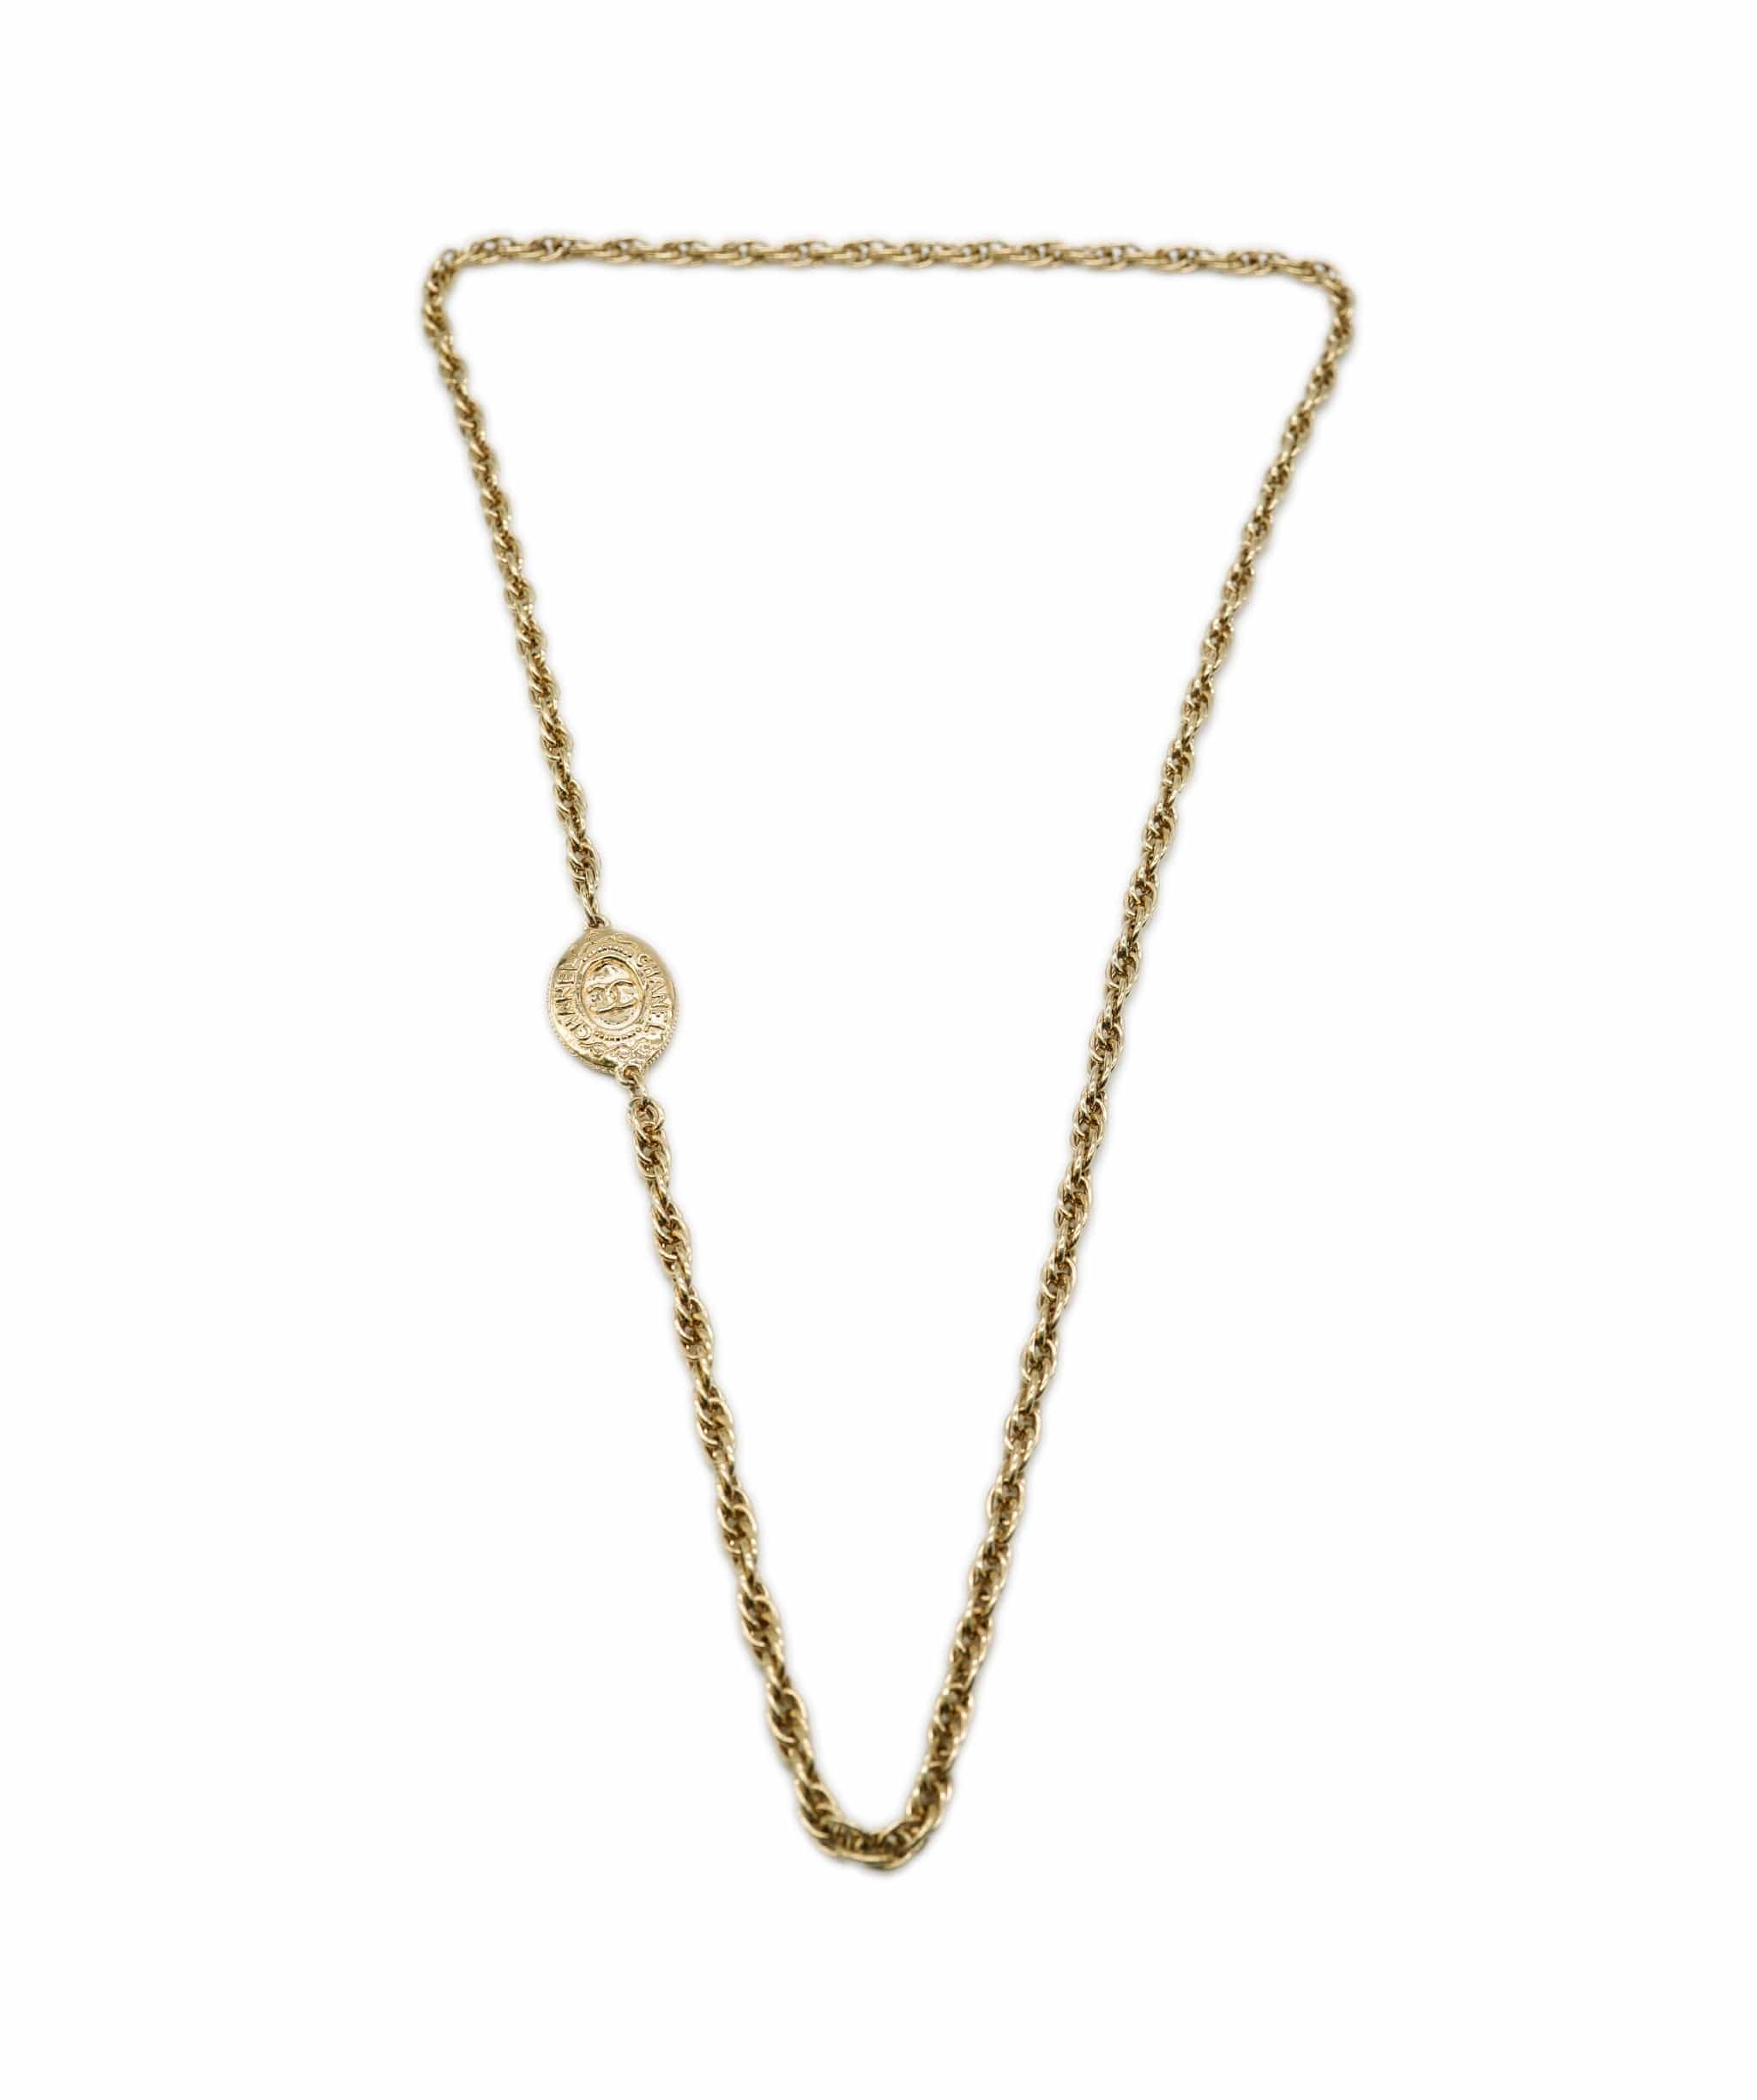 Chanel Long chain chanel lion necklace ASL3527